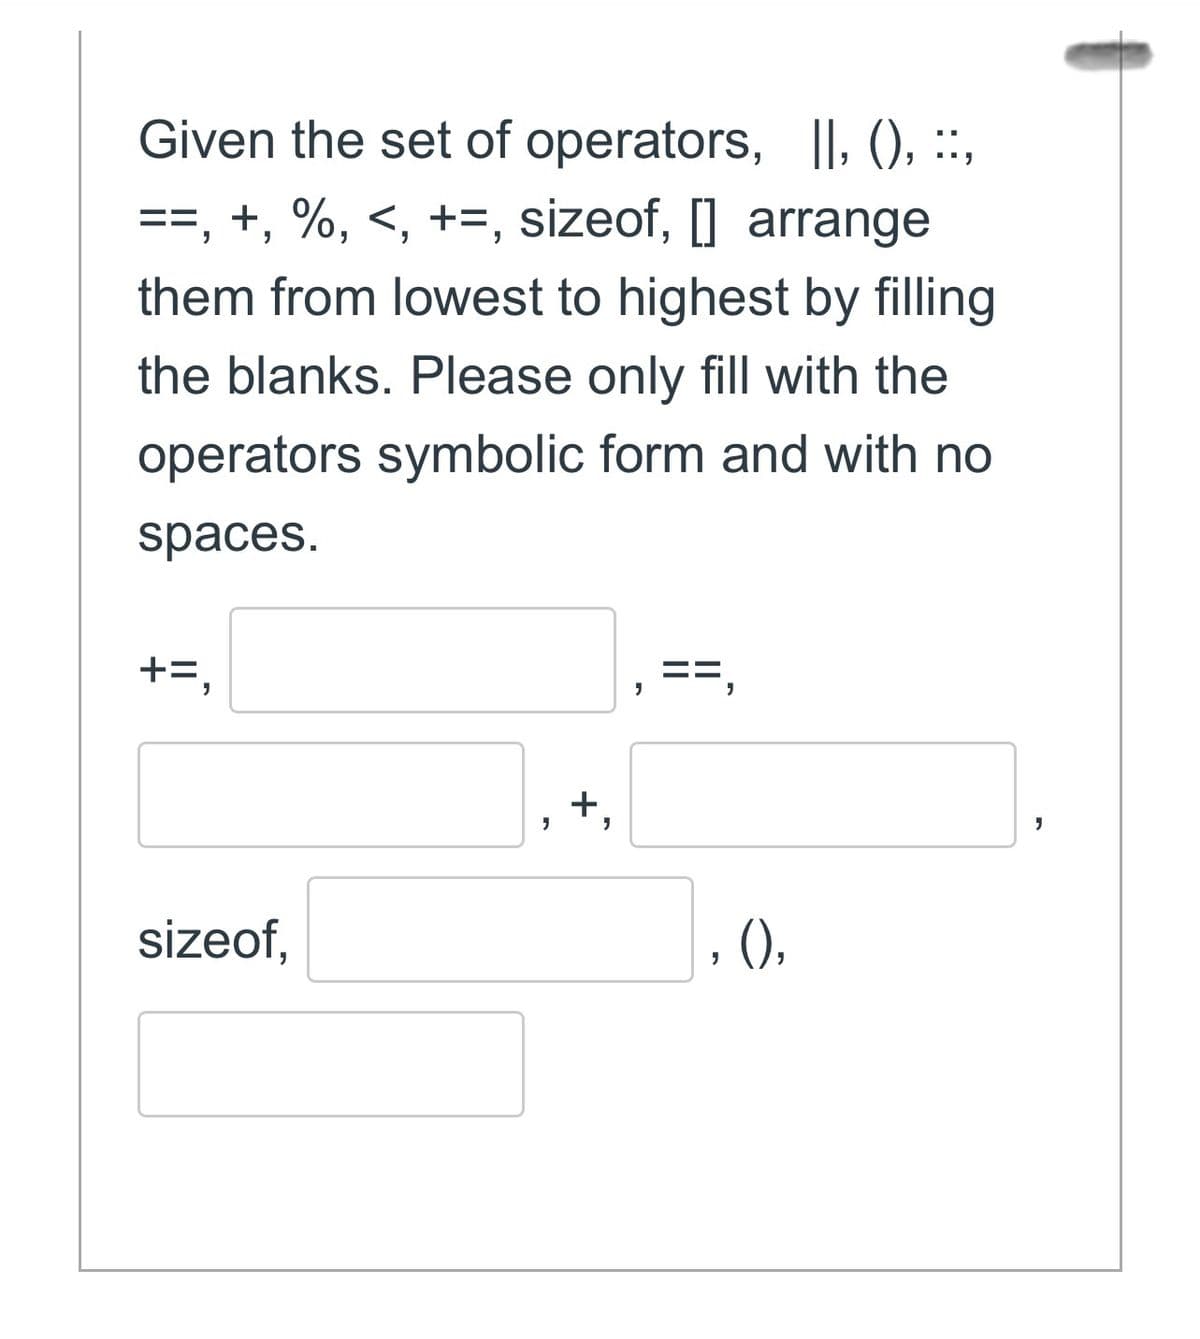 Given the set of operators, II, (), ::,
==, +, %, <, +=, sizeof, [] arrange
them from lowest to highest by filling
the blanks. Please only fill with the
operators symbolic form and with no
spaces.
+=,
sizeof,
+,
"
==,
"
()),
"